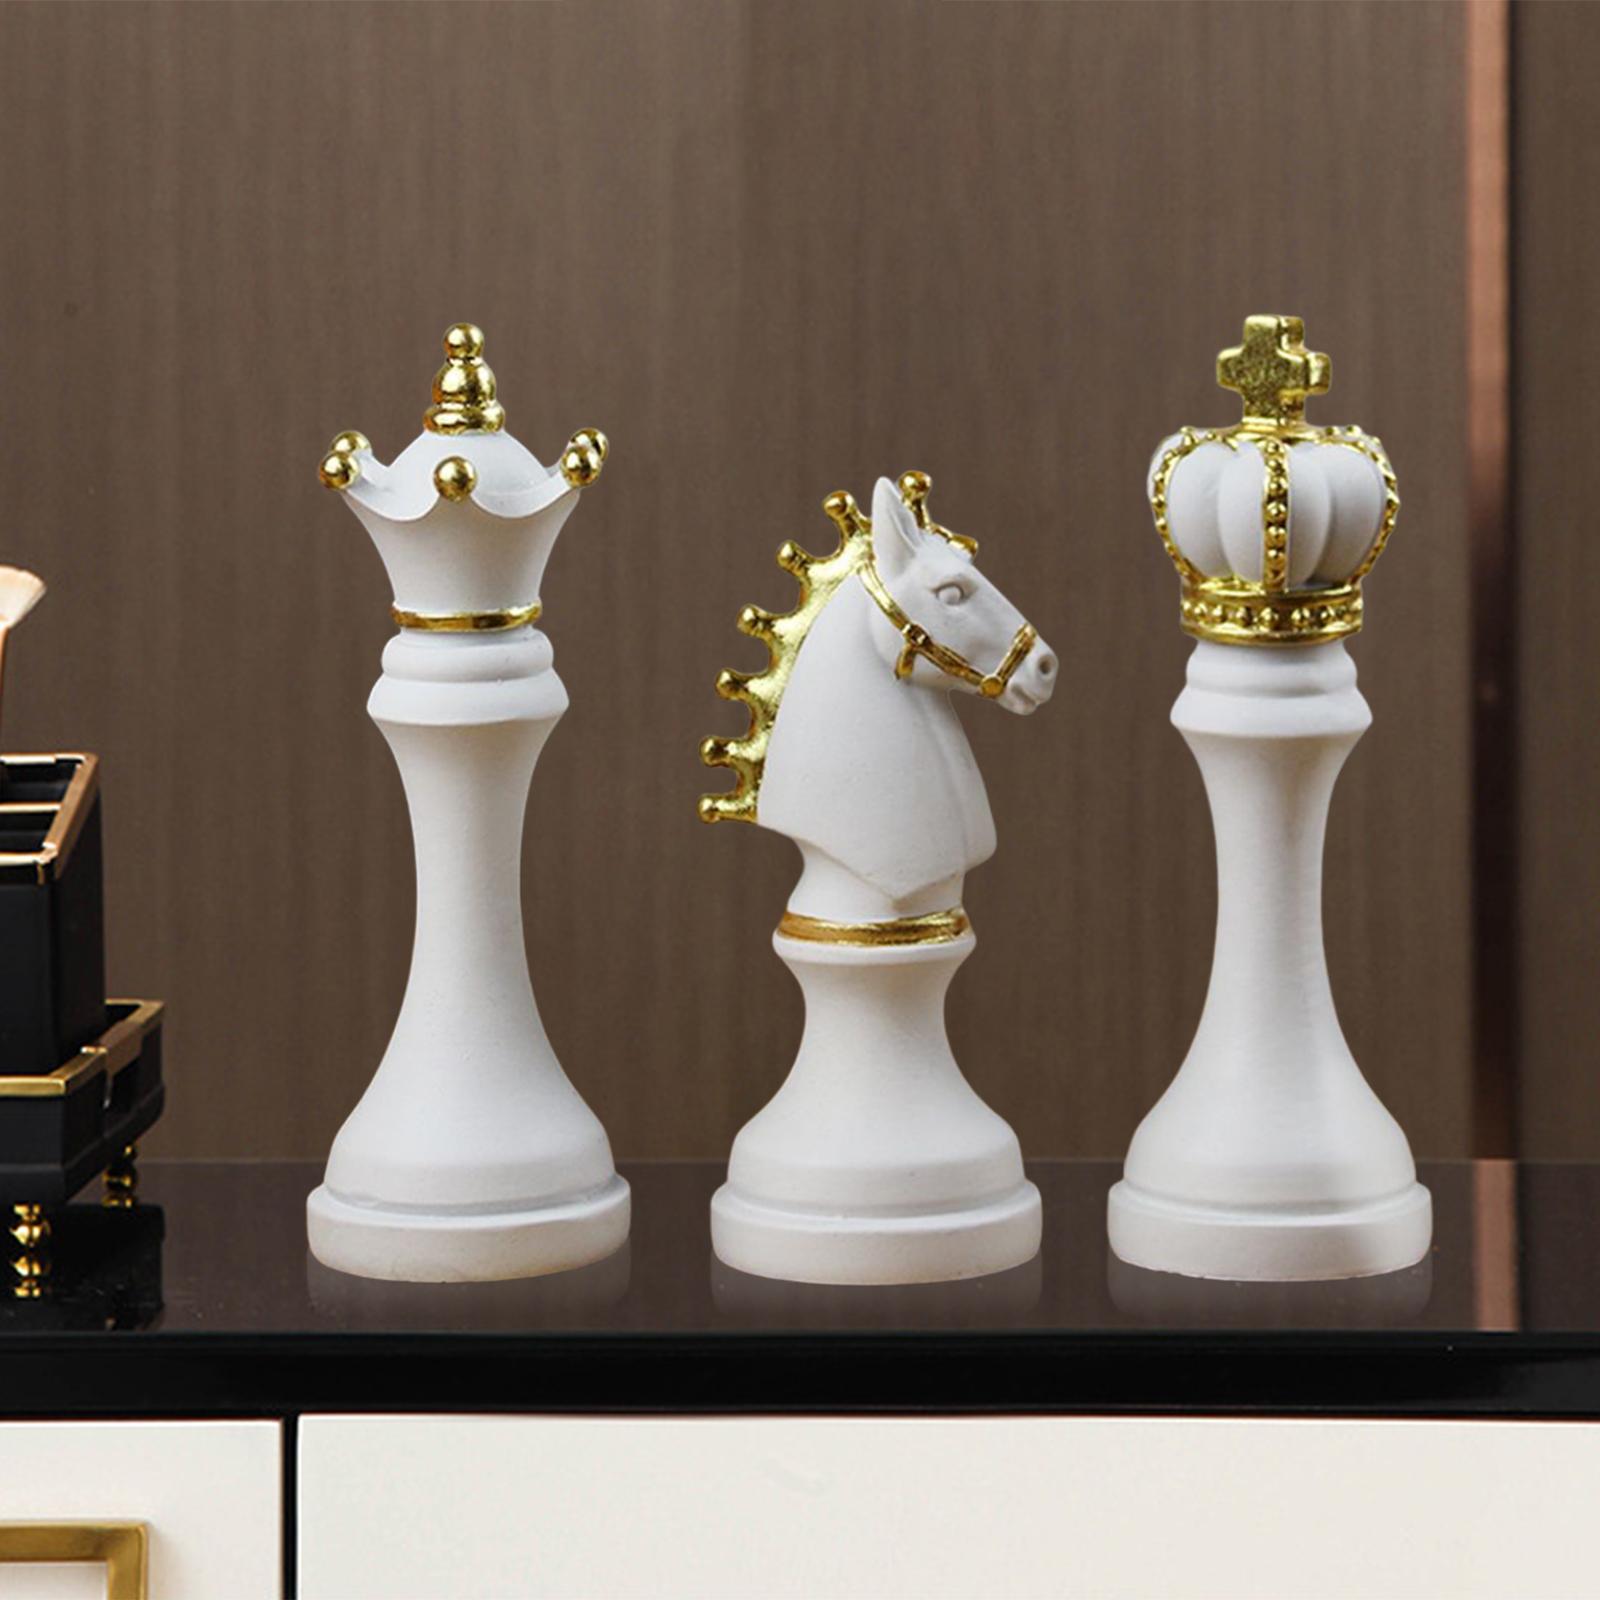 3Pcs Creative International Chess Figurine Statue for Office Home Decoration White